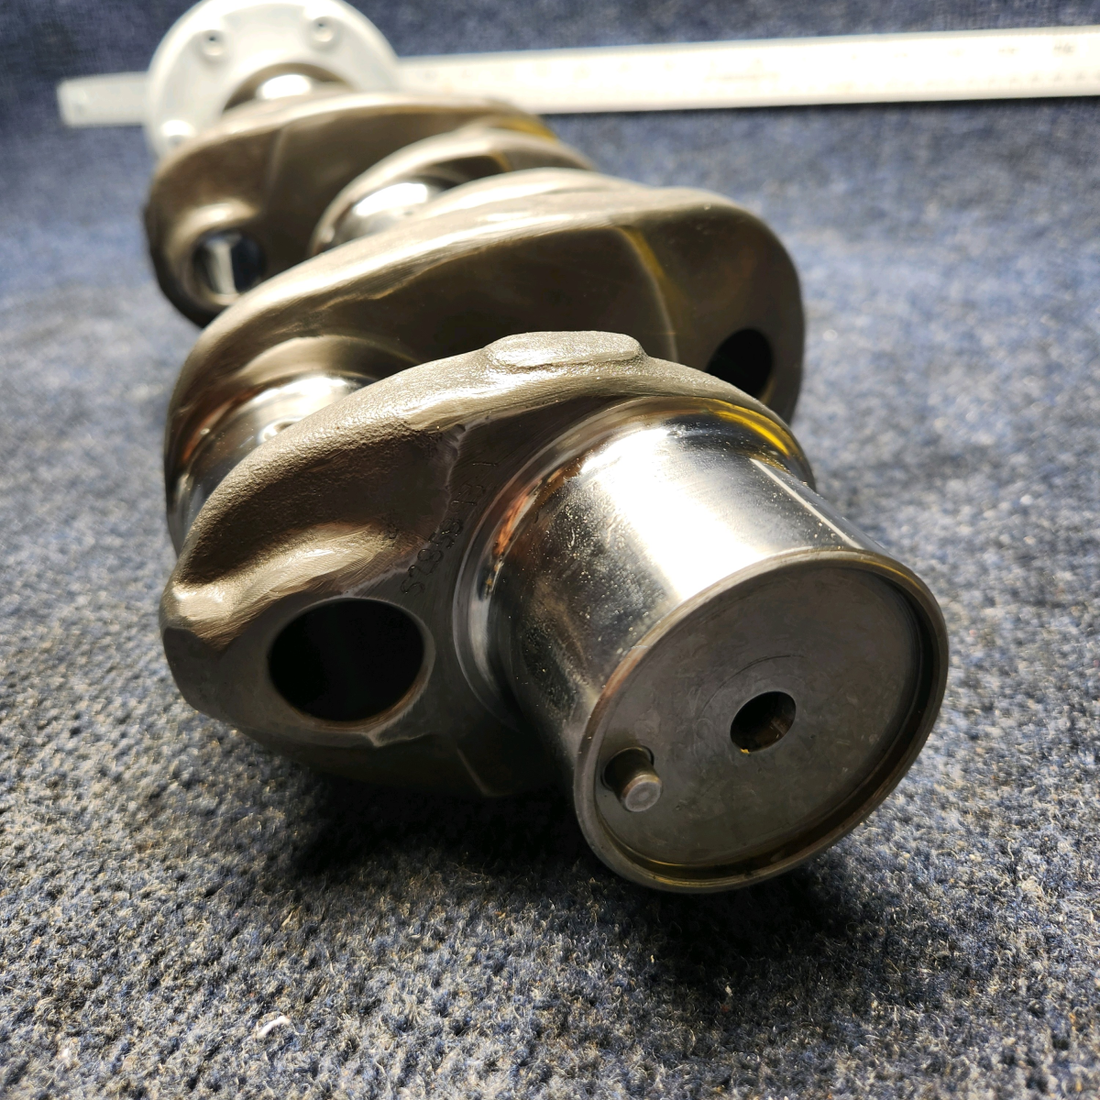 Used aircraft parts for sale, 13B47024 Lycoming Lycoming O-320 CRANK SHAFT ASSY SOLD W/ 8130-3 AND SB 505B DT - SB530B DT.